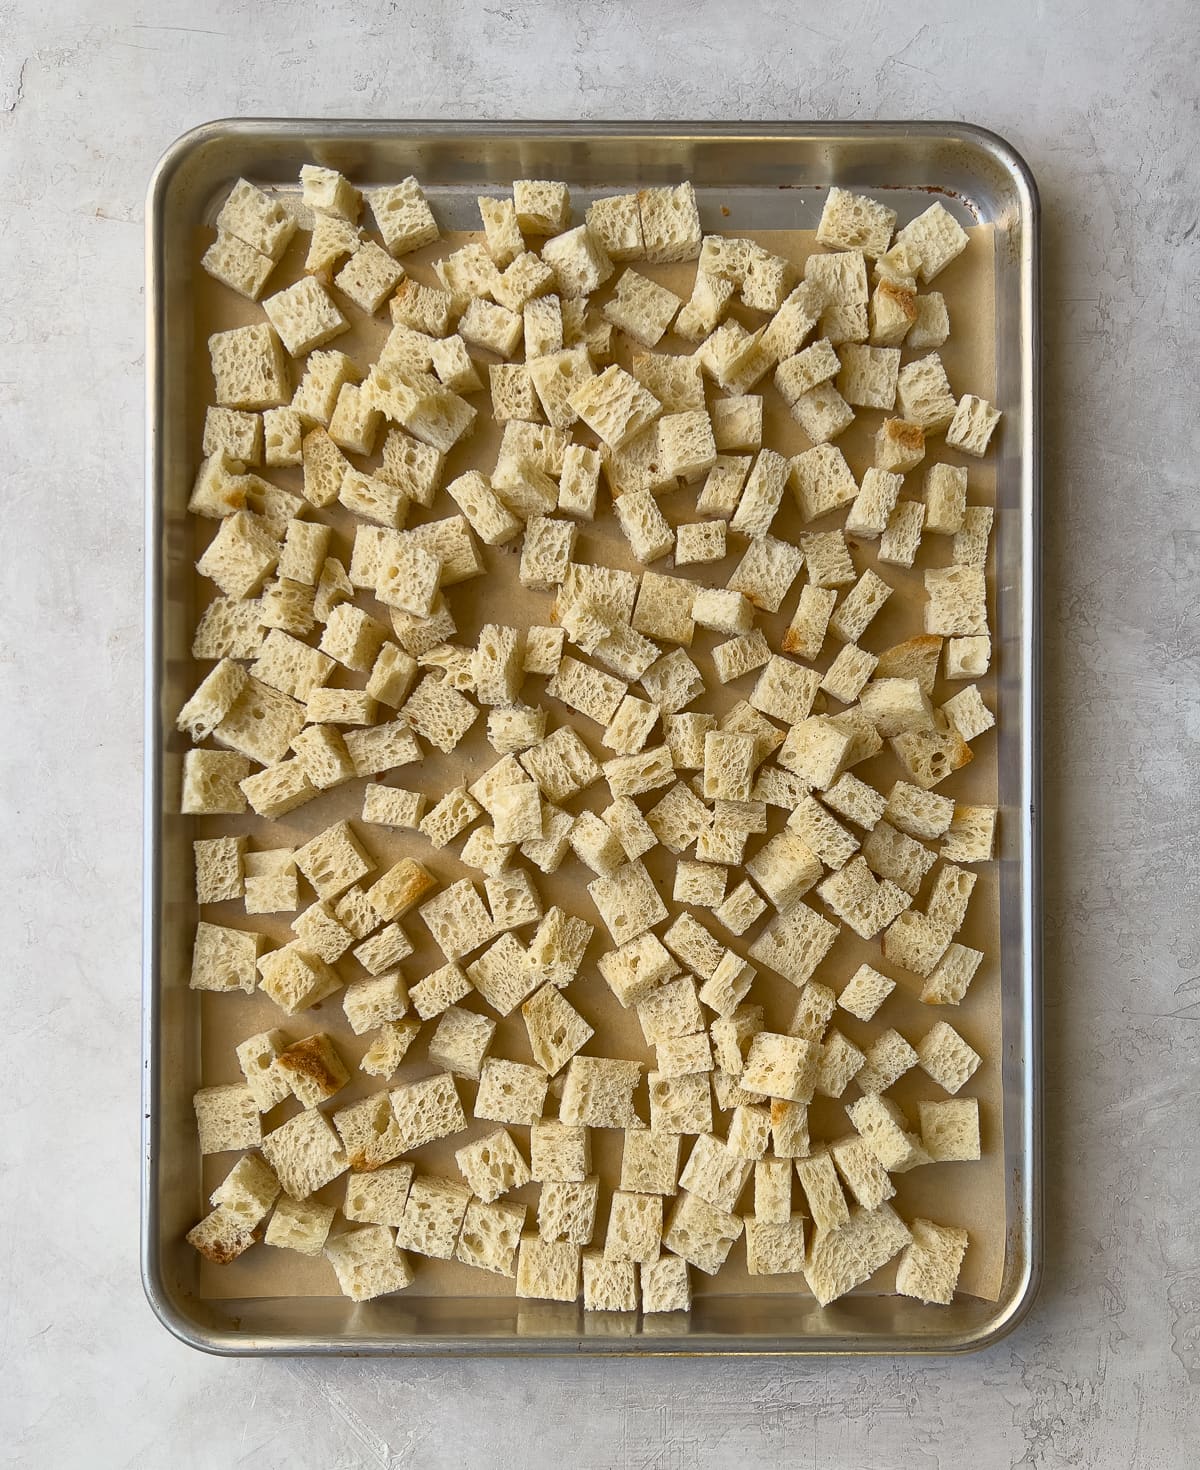 Bread cubes drying on baking sheet.